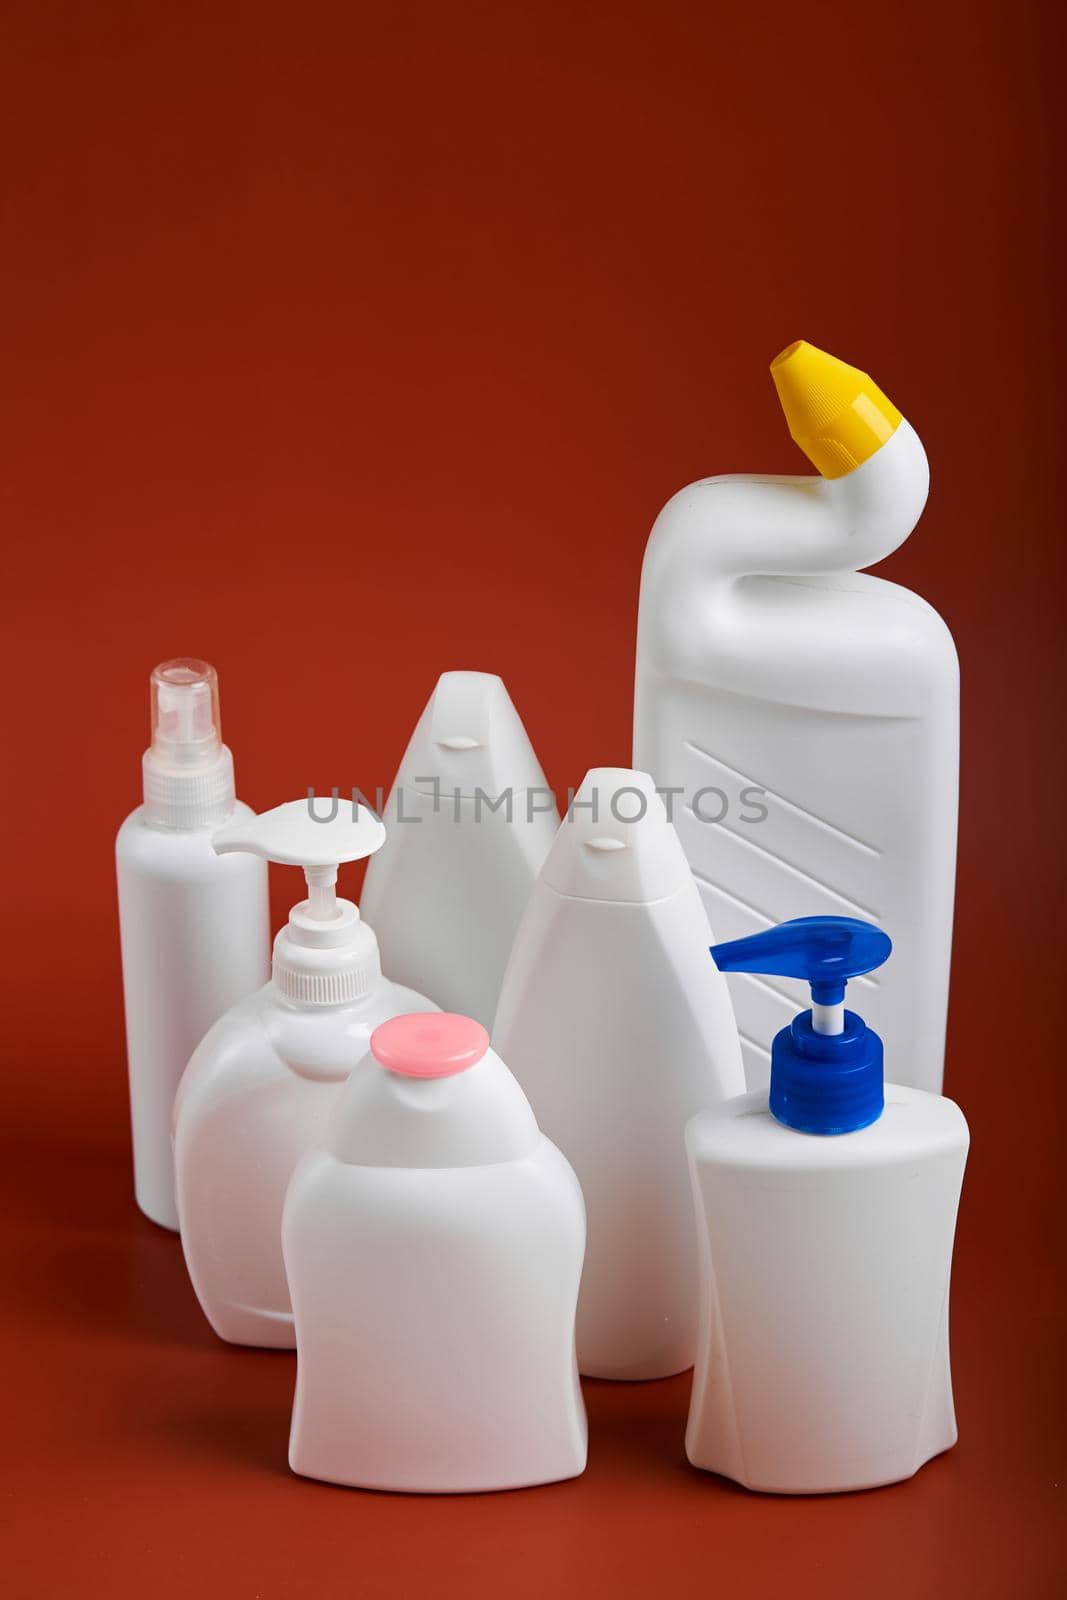 A various shapes blank white plastic bottles of soap products.